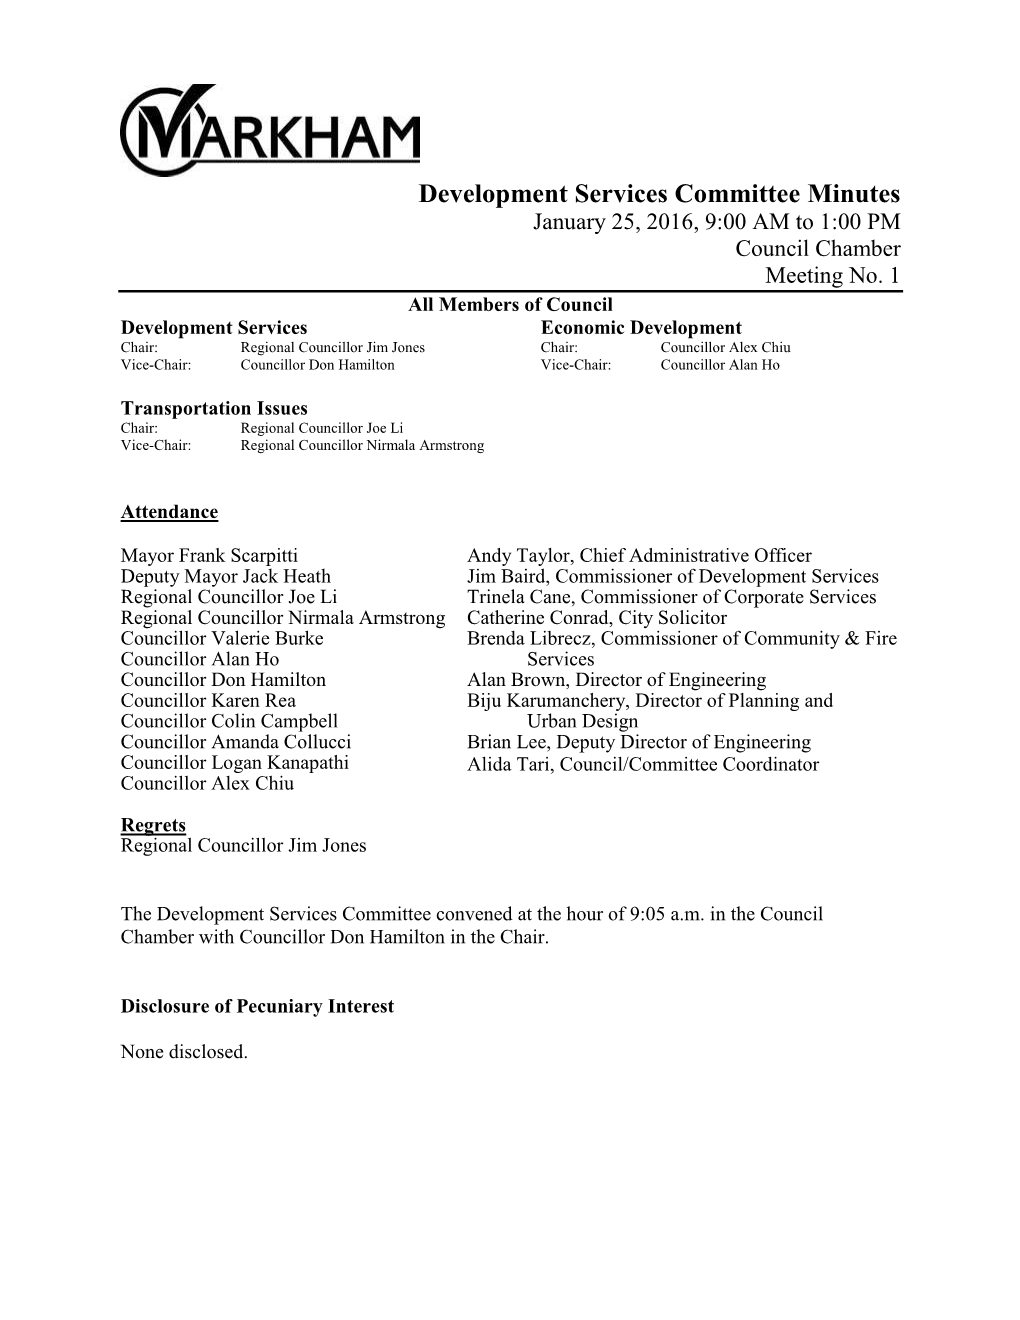 Development Services Committee Minutes January 25, 2016, 9:00 AM to 1:00 PM Council Chamber Meeting No